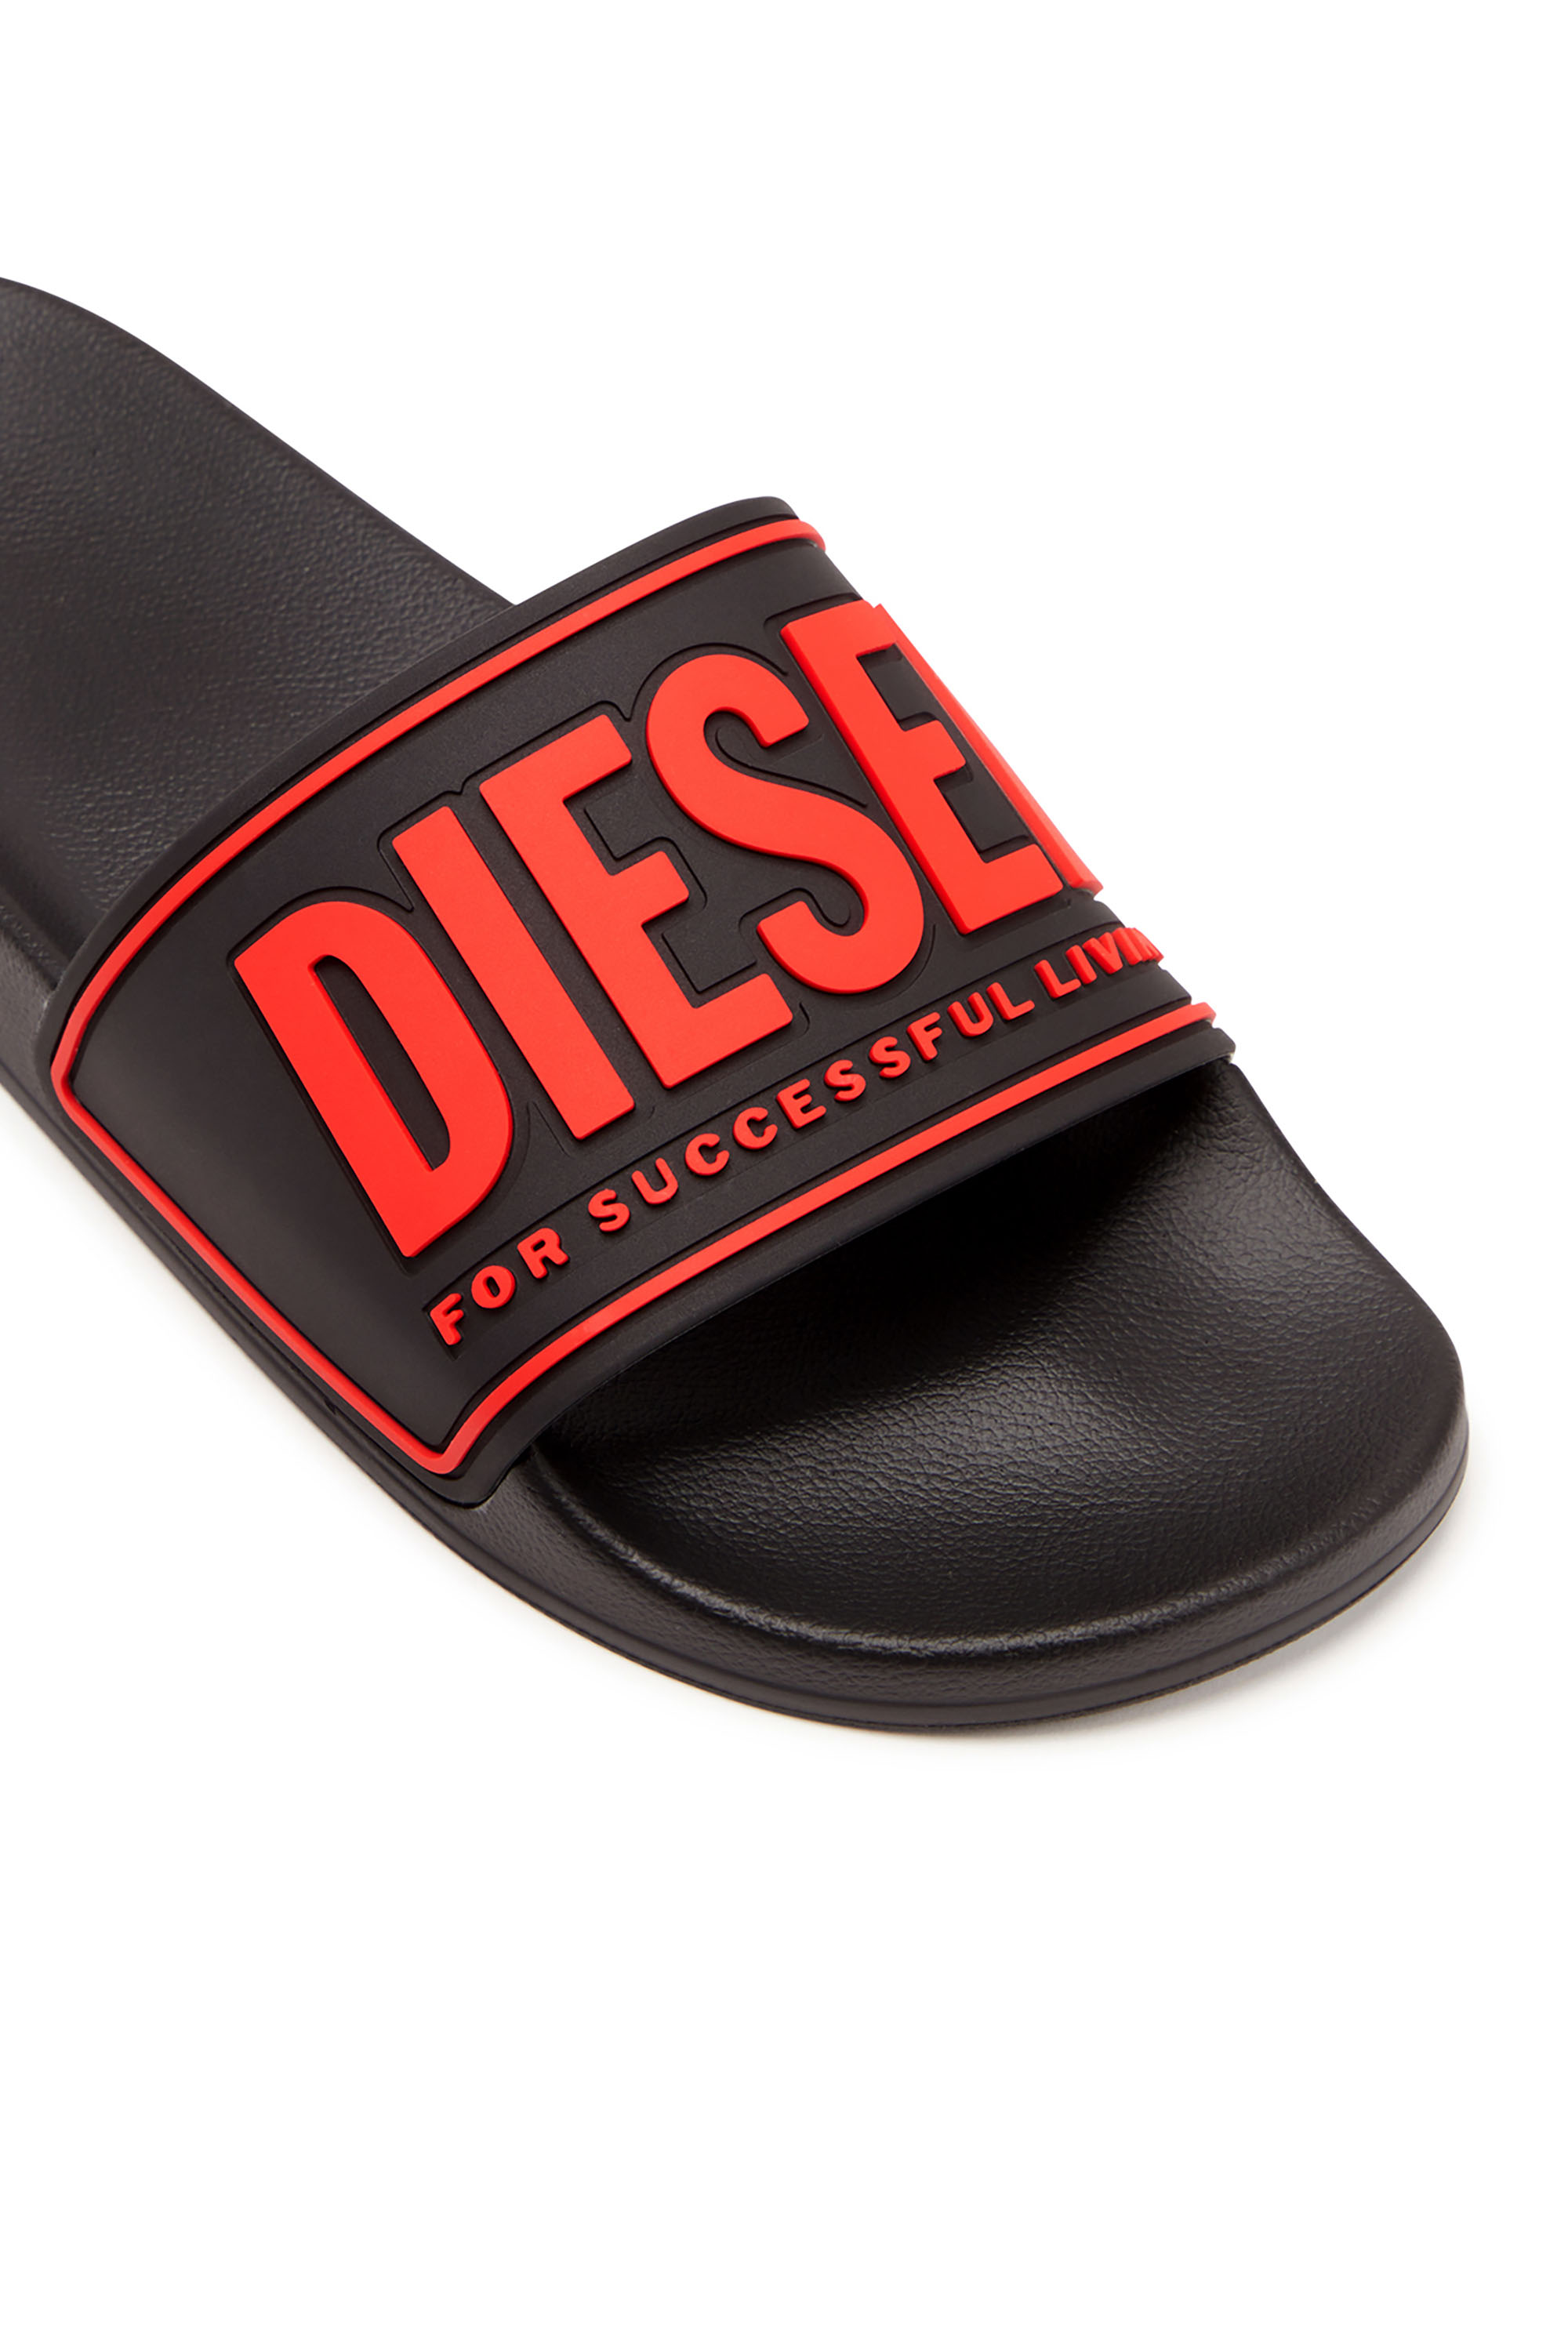 Discover 158+ diesel mens slippers latest